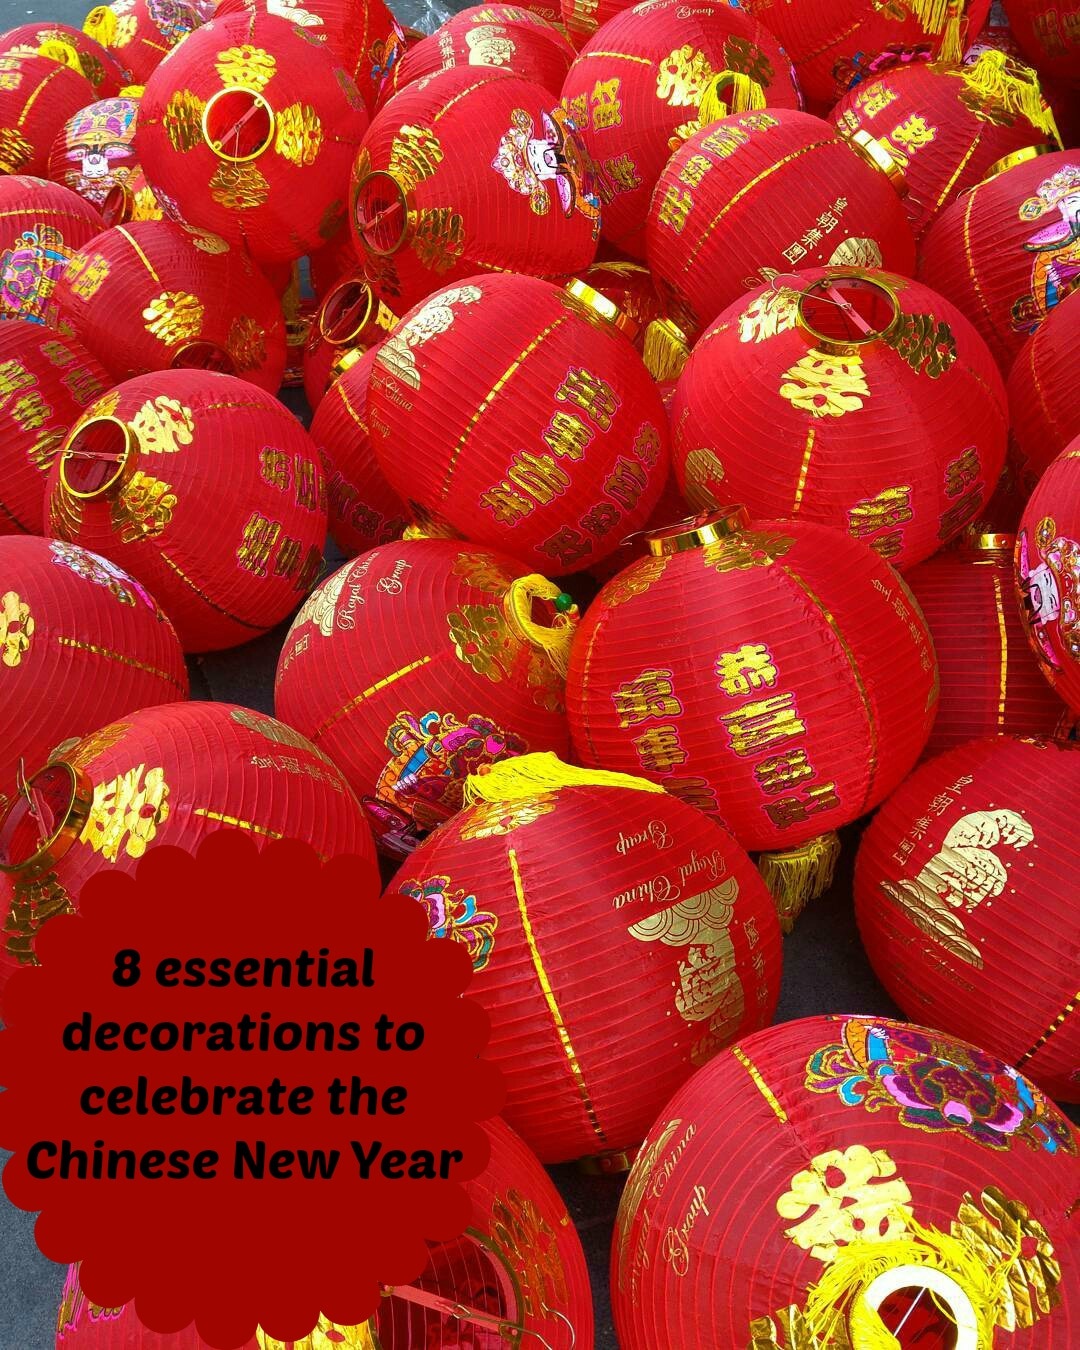 20 Pieces 10 Inch Chinese Red Paper Lanterns Festival Decorations for New Year